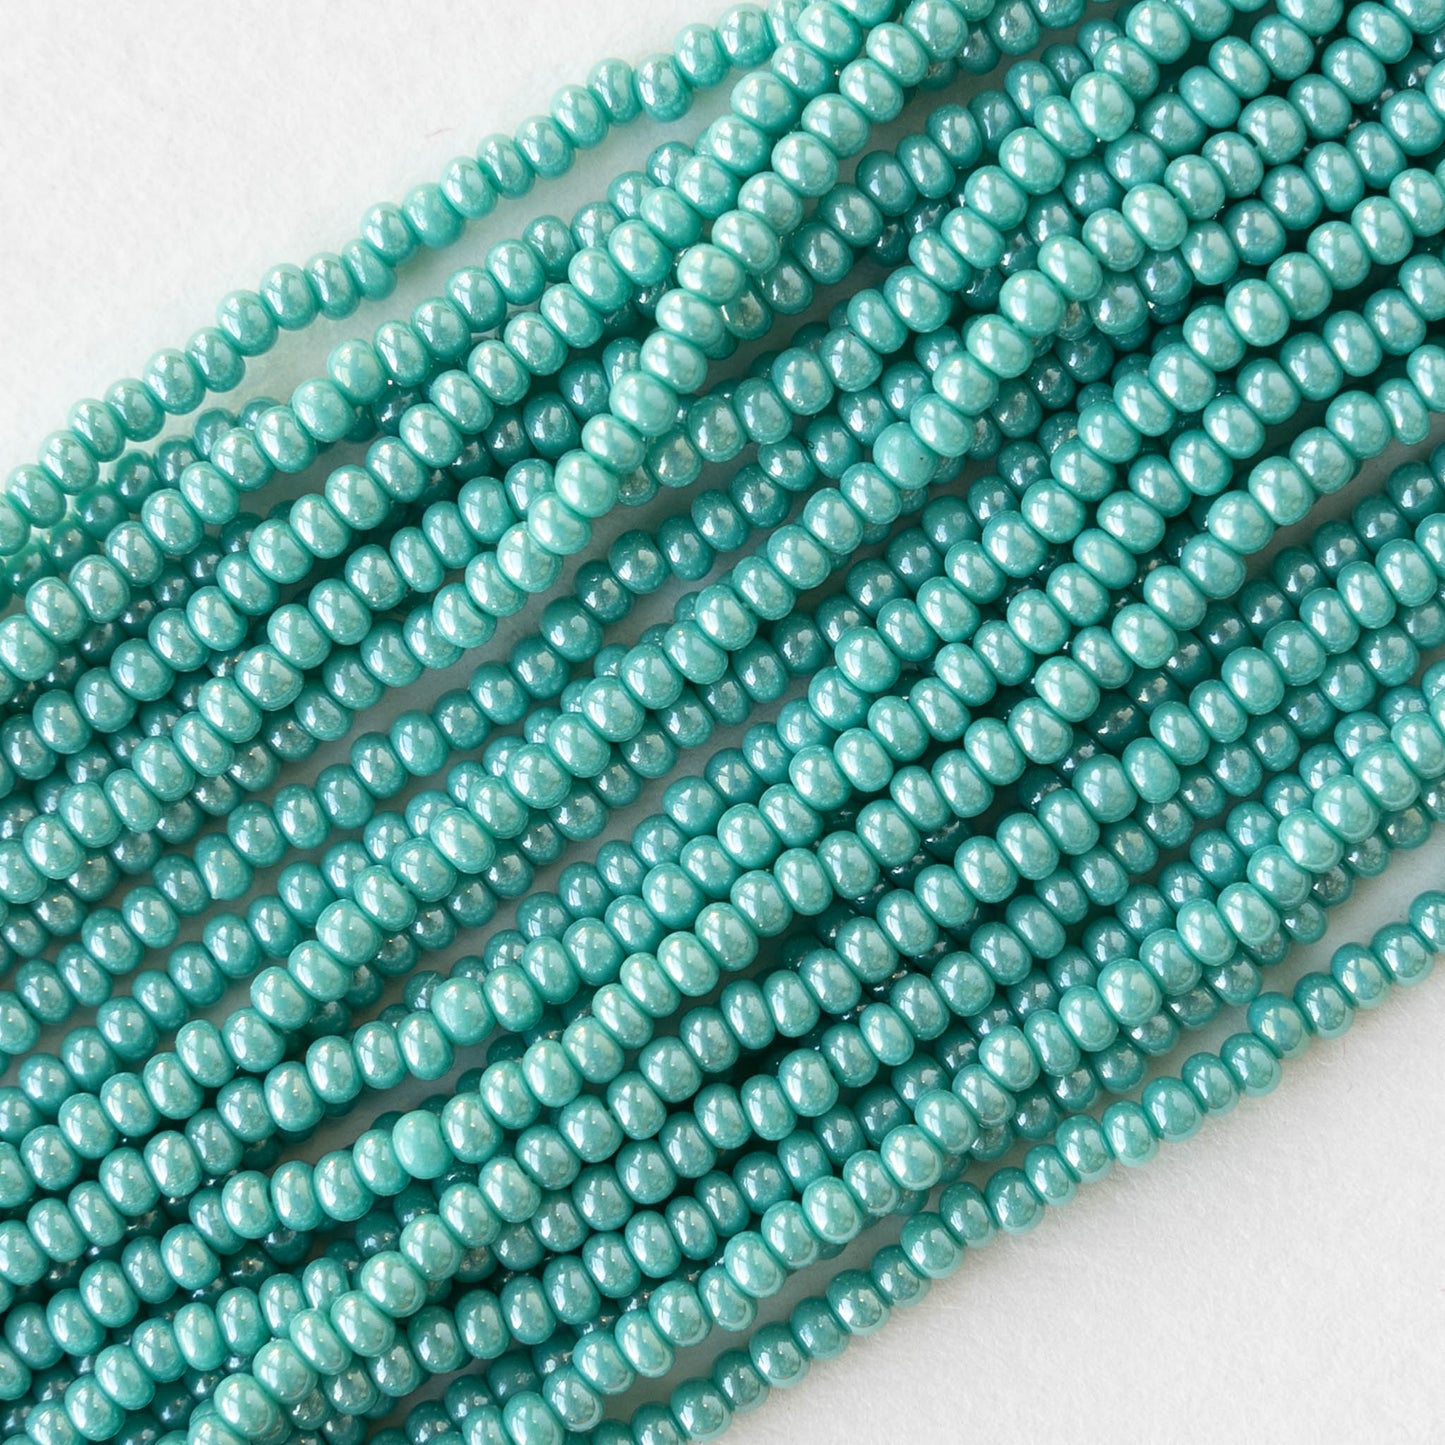 11/0 Glass Seed Beads - Opaque Green Turquoise Luster - 6 Strands